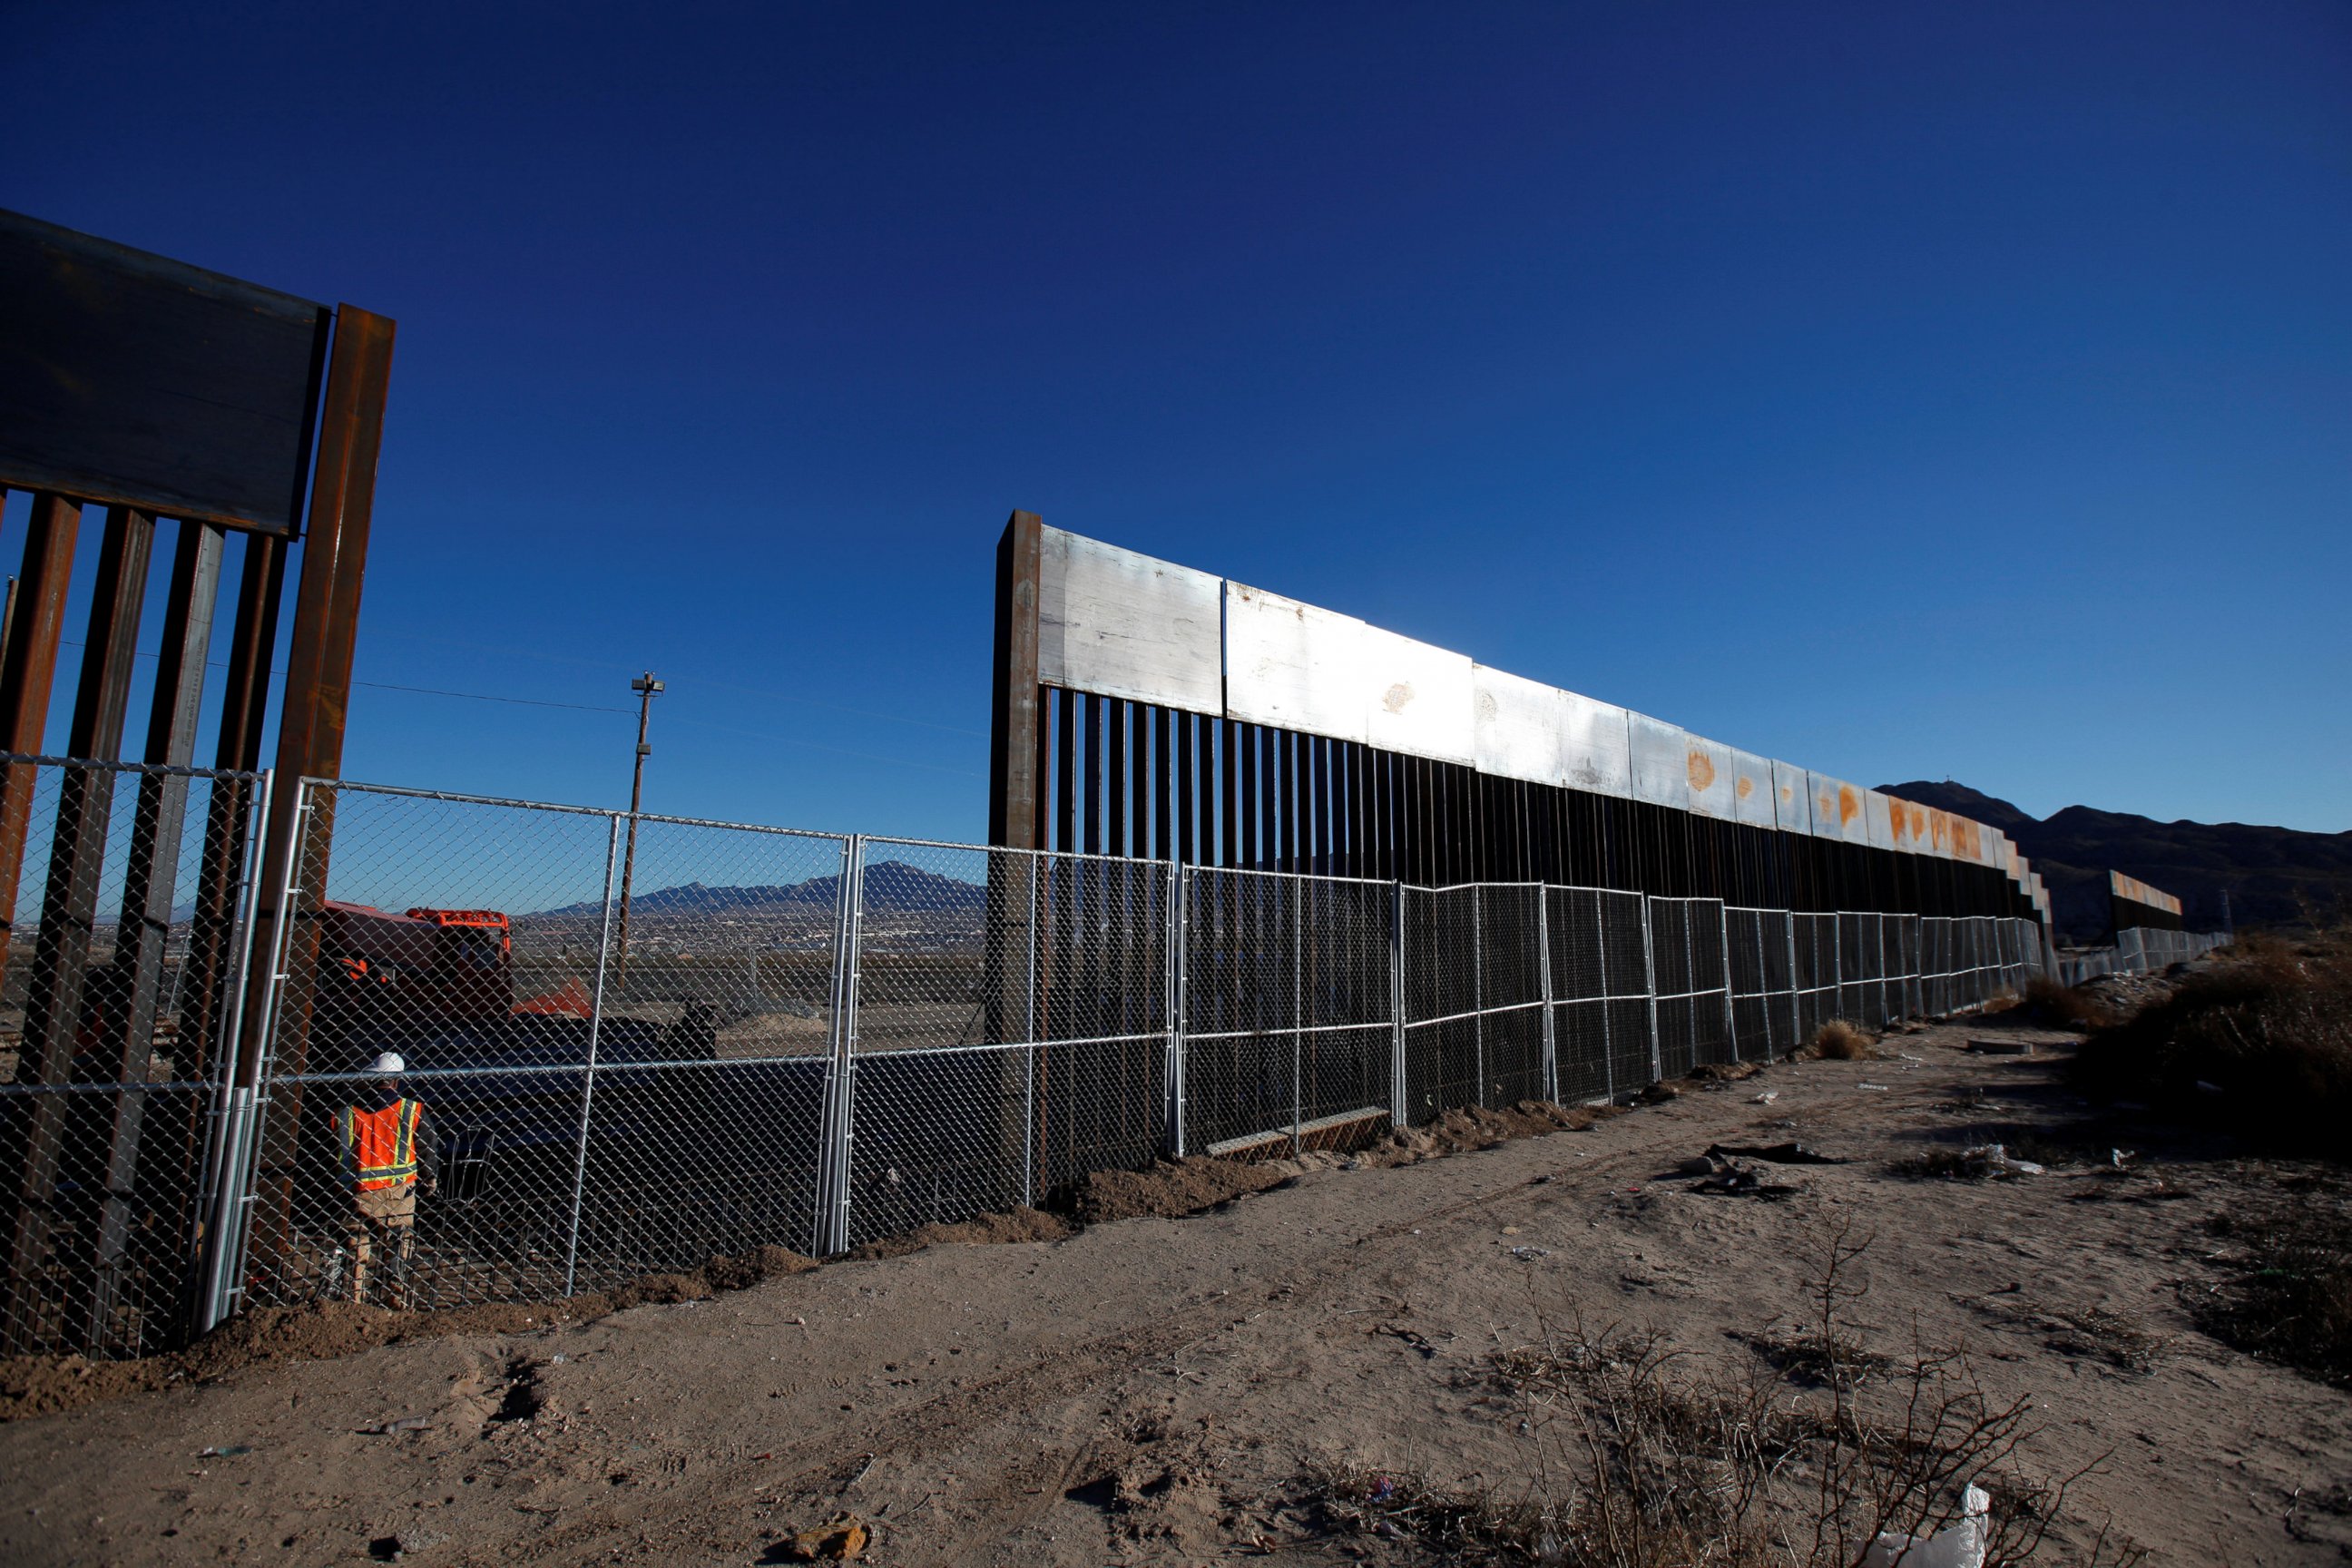 PHOTO: A worker stands next to a newly built section of the U.S.-Mexico border fence at Sunland Park, U.S. opposite the Mexican border city of Ciudad Juarez, Mexico January 25, 2017. Picture taken from the Mexico side of the U.S.-Mexico border. 